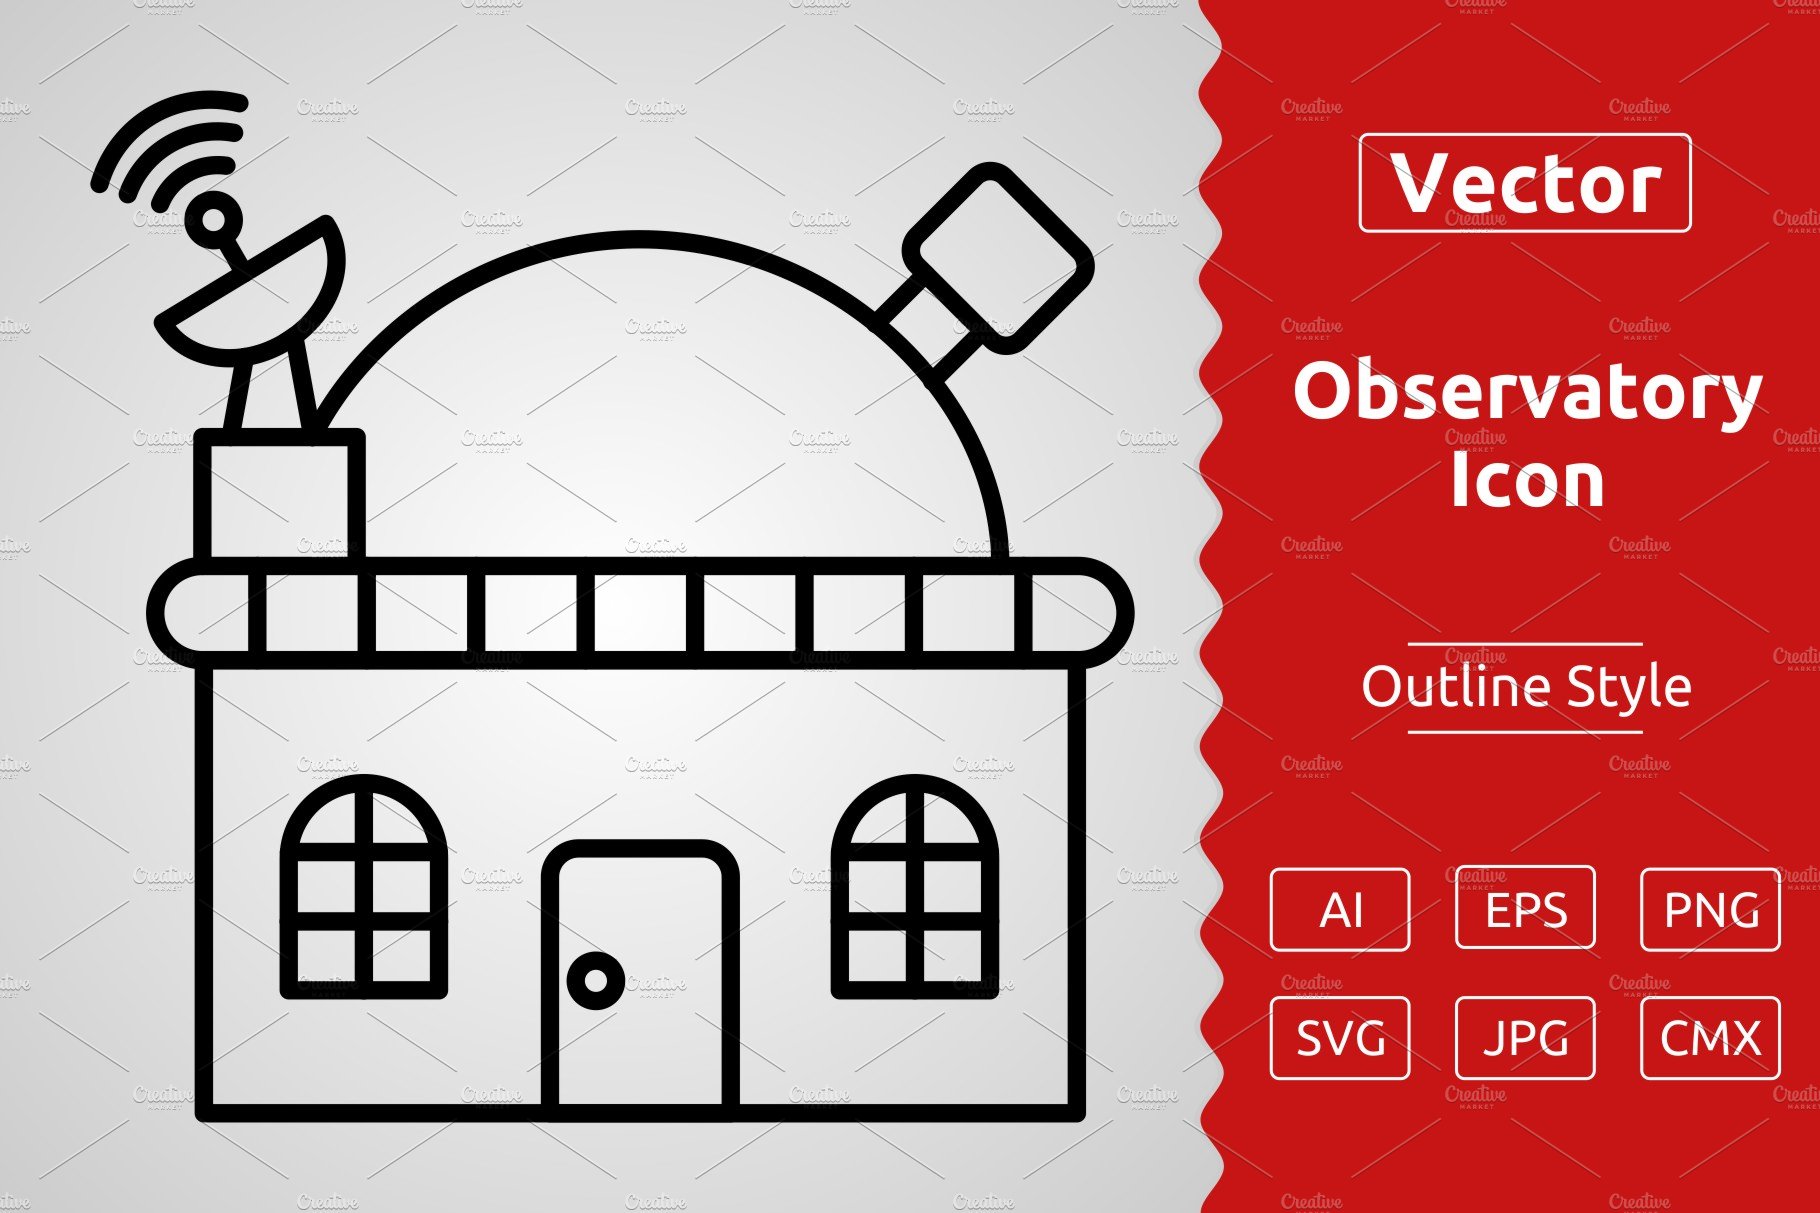 Vector Observatory Outline Icon cover image.